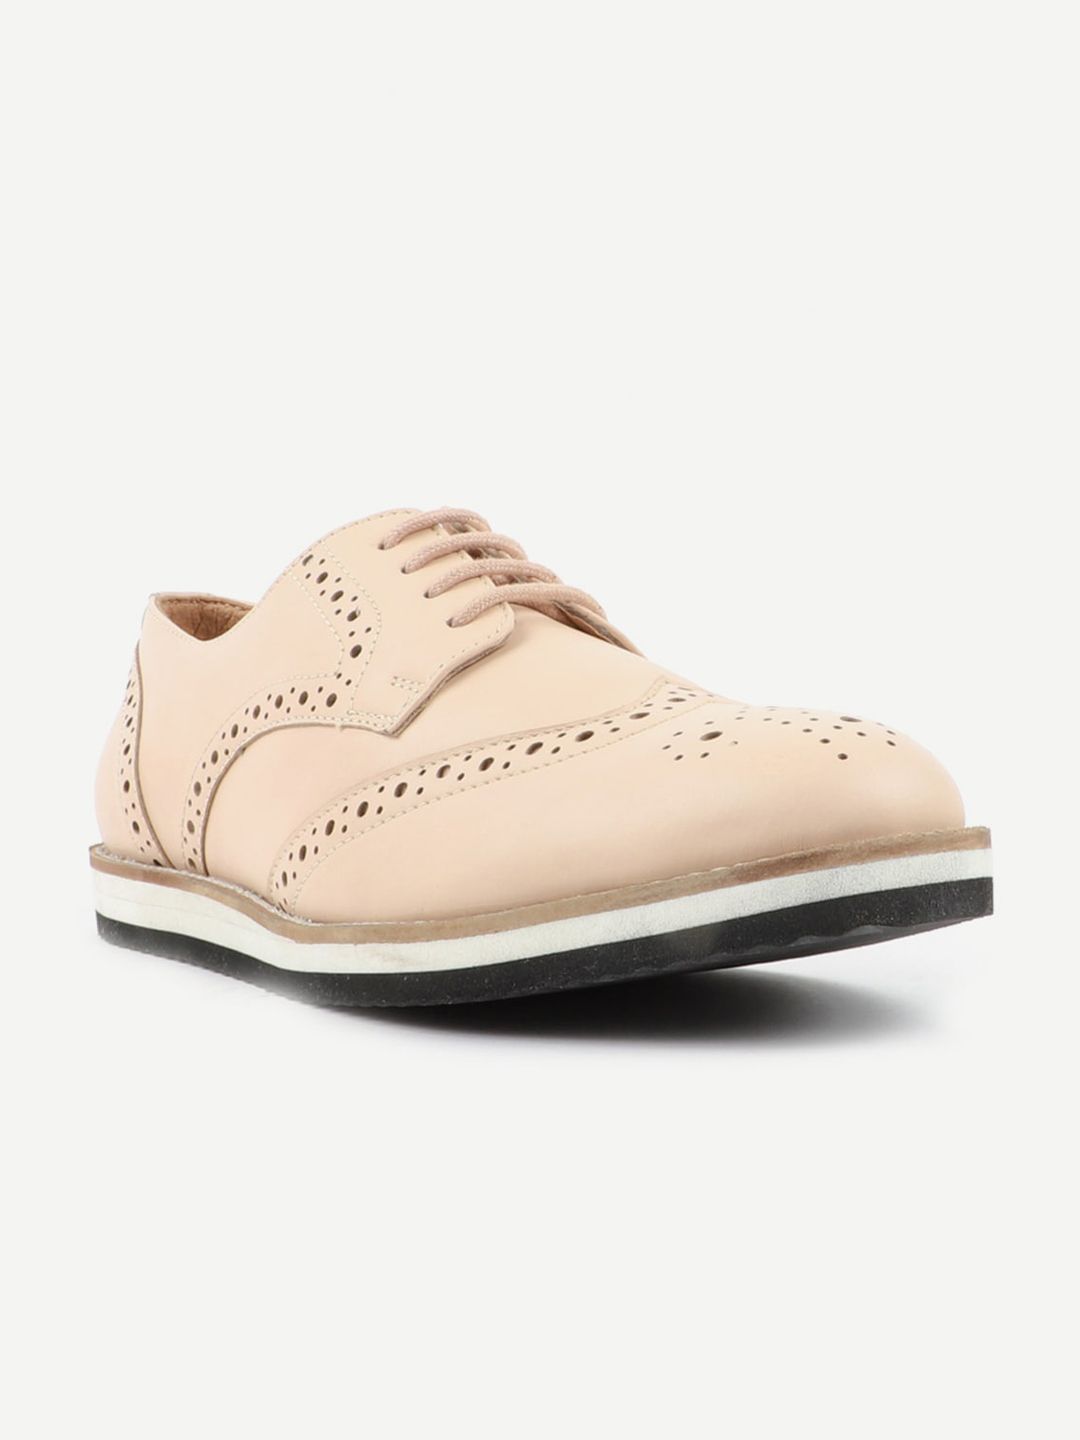 Carlton London Women Nude-Coloured Perforations Brogues Price in India